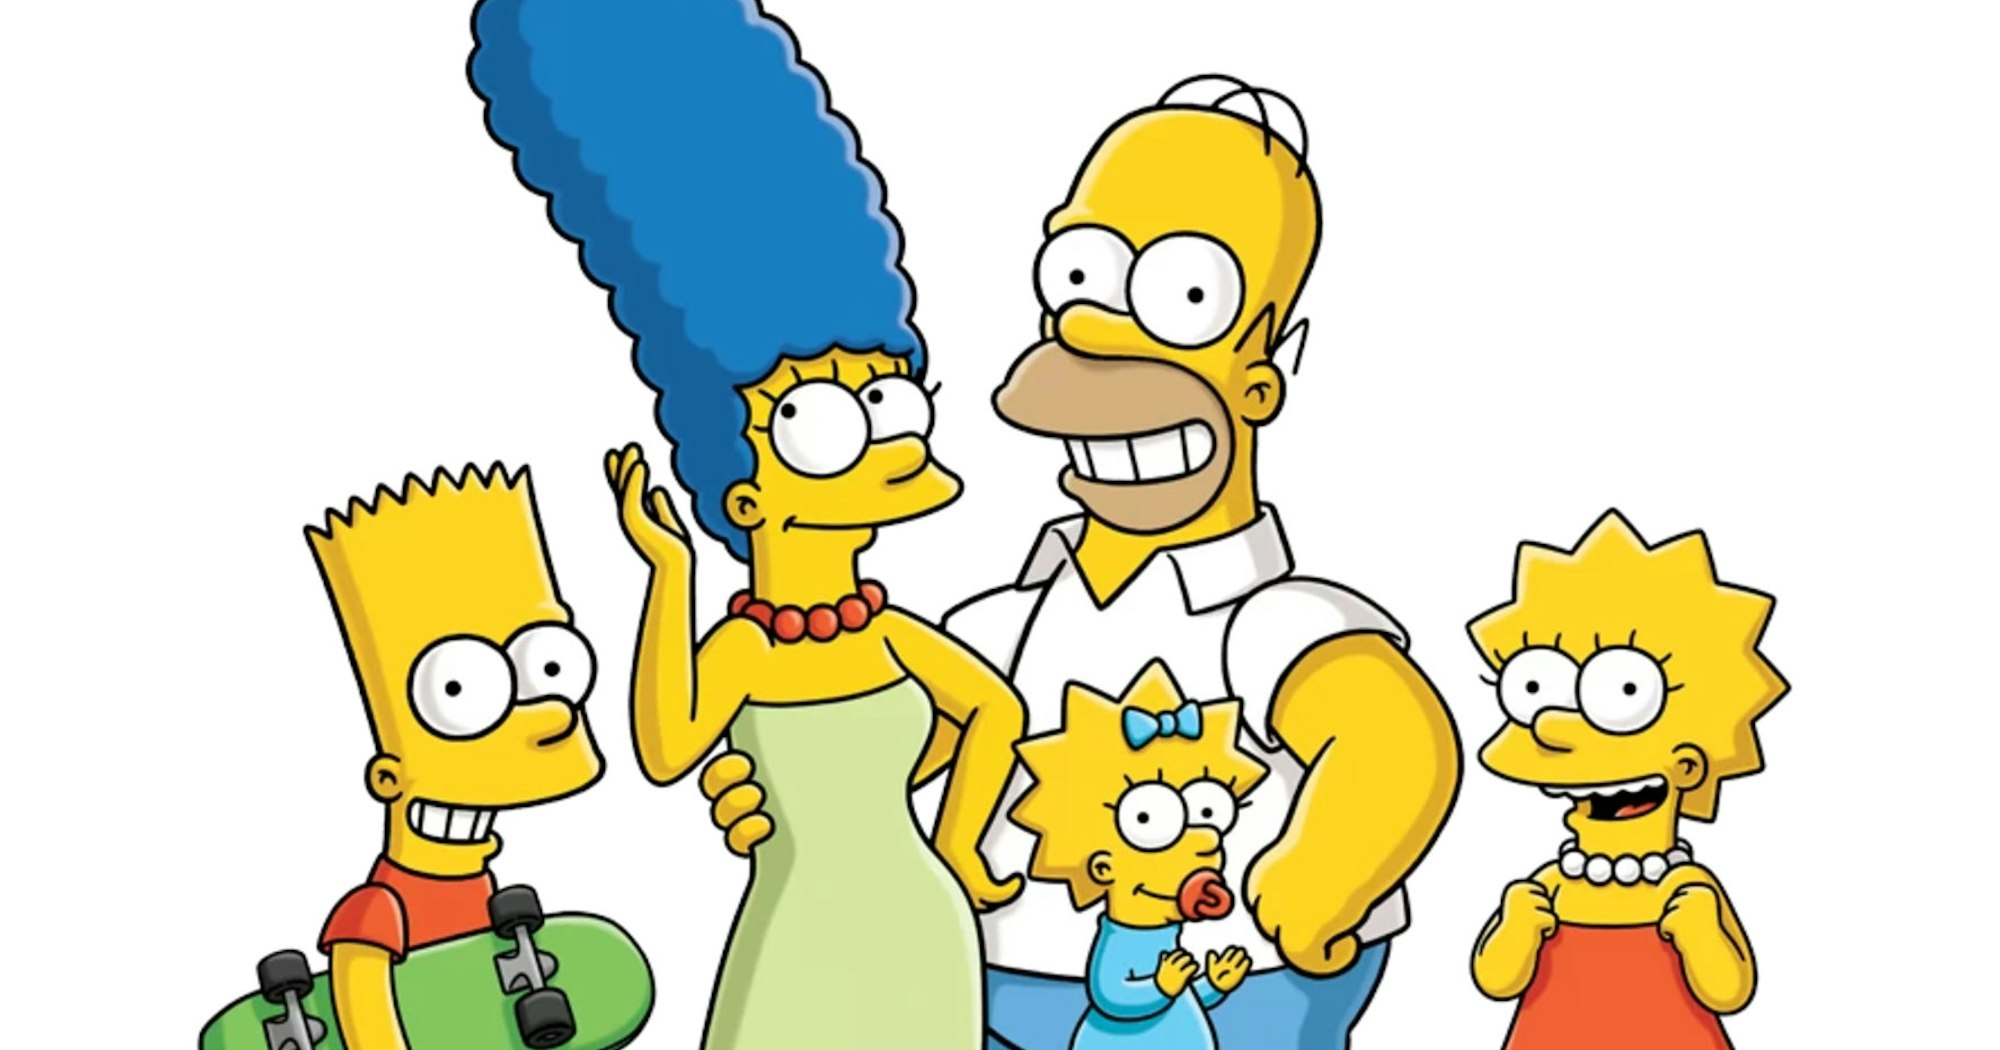 Did the Simpsons Ruin a Generation? | Desiring God